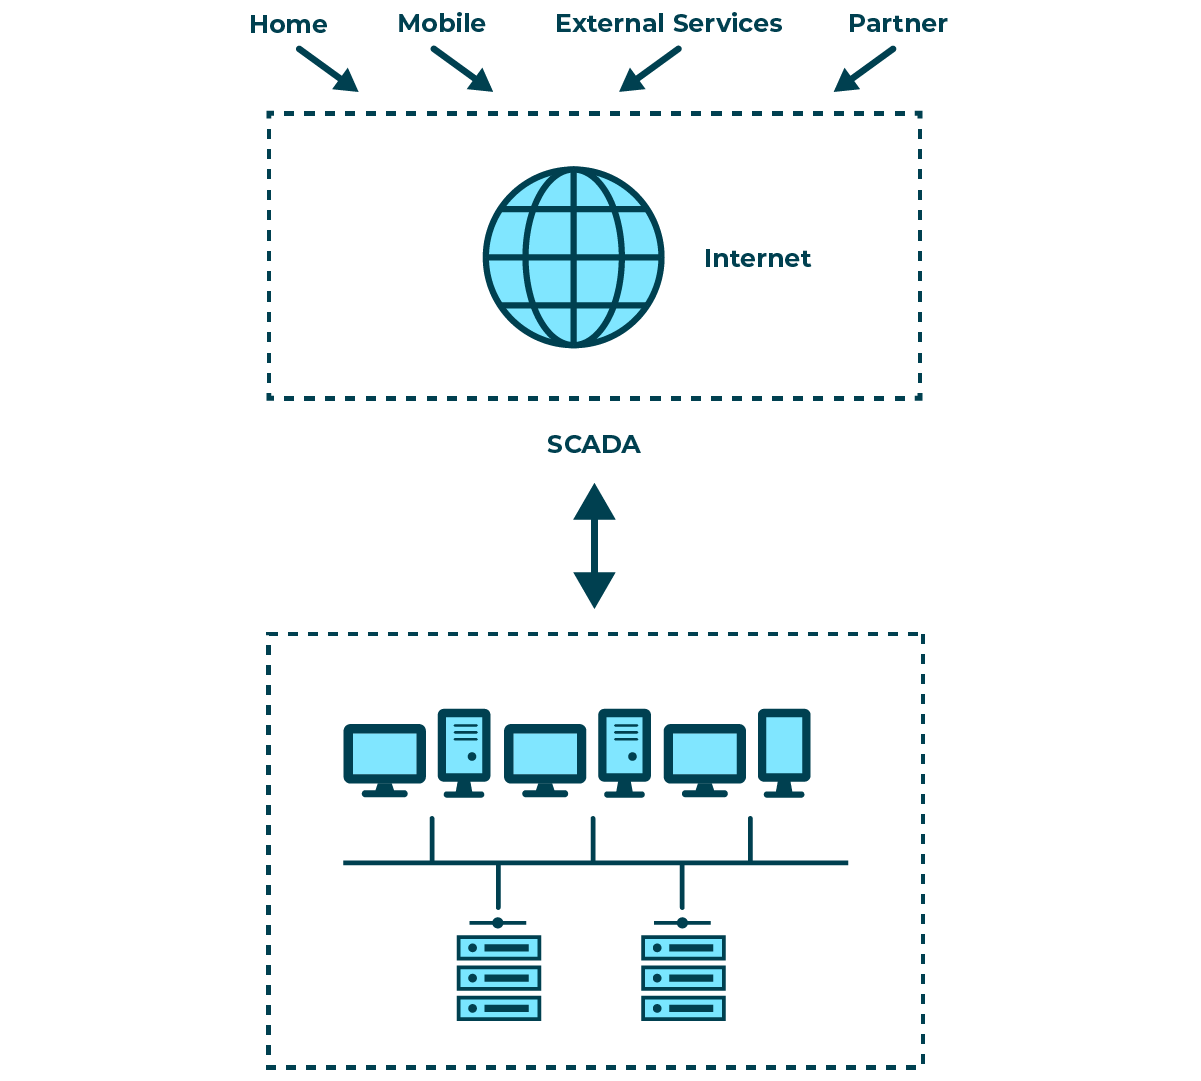 Diagram showing SCADA users: Home, Mobile, External services, Partner